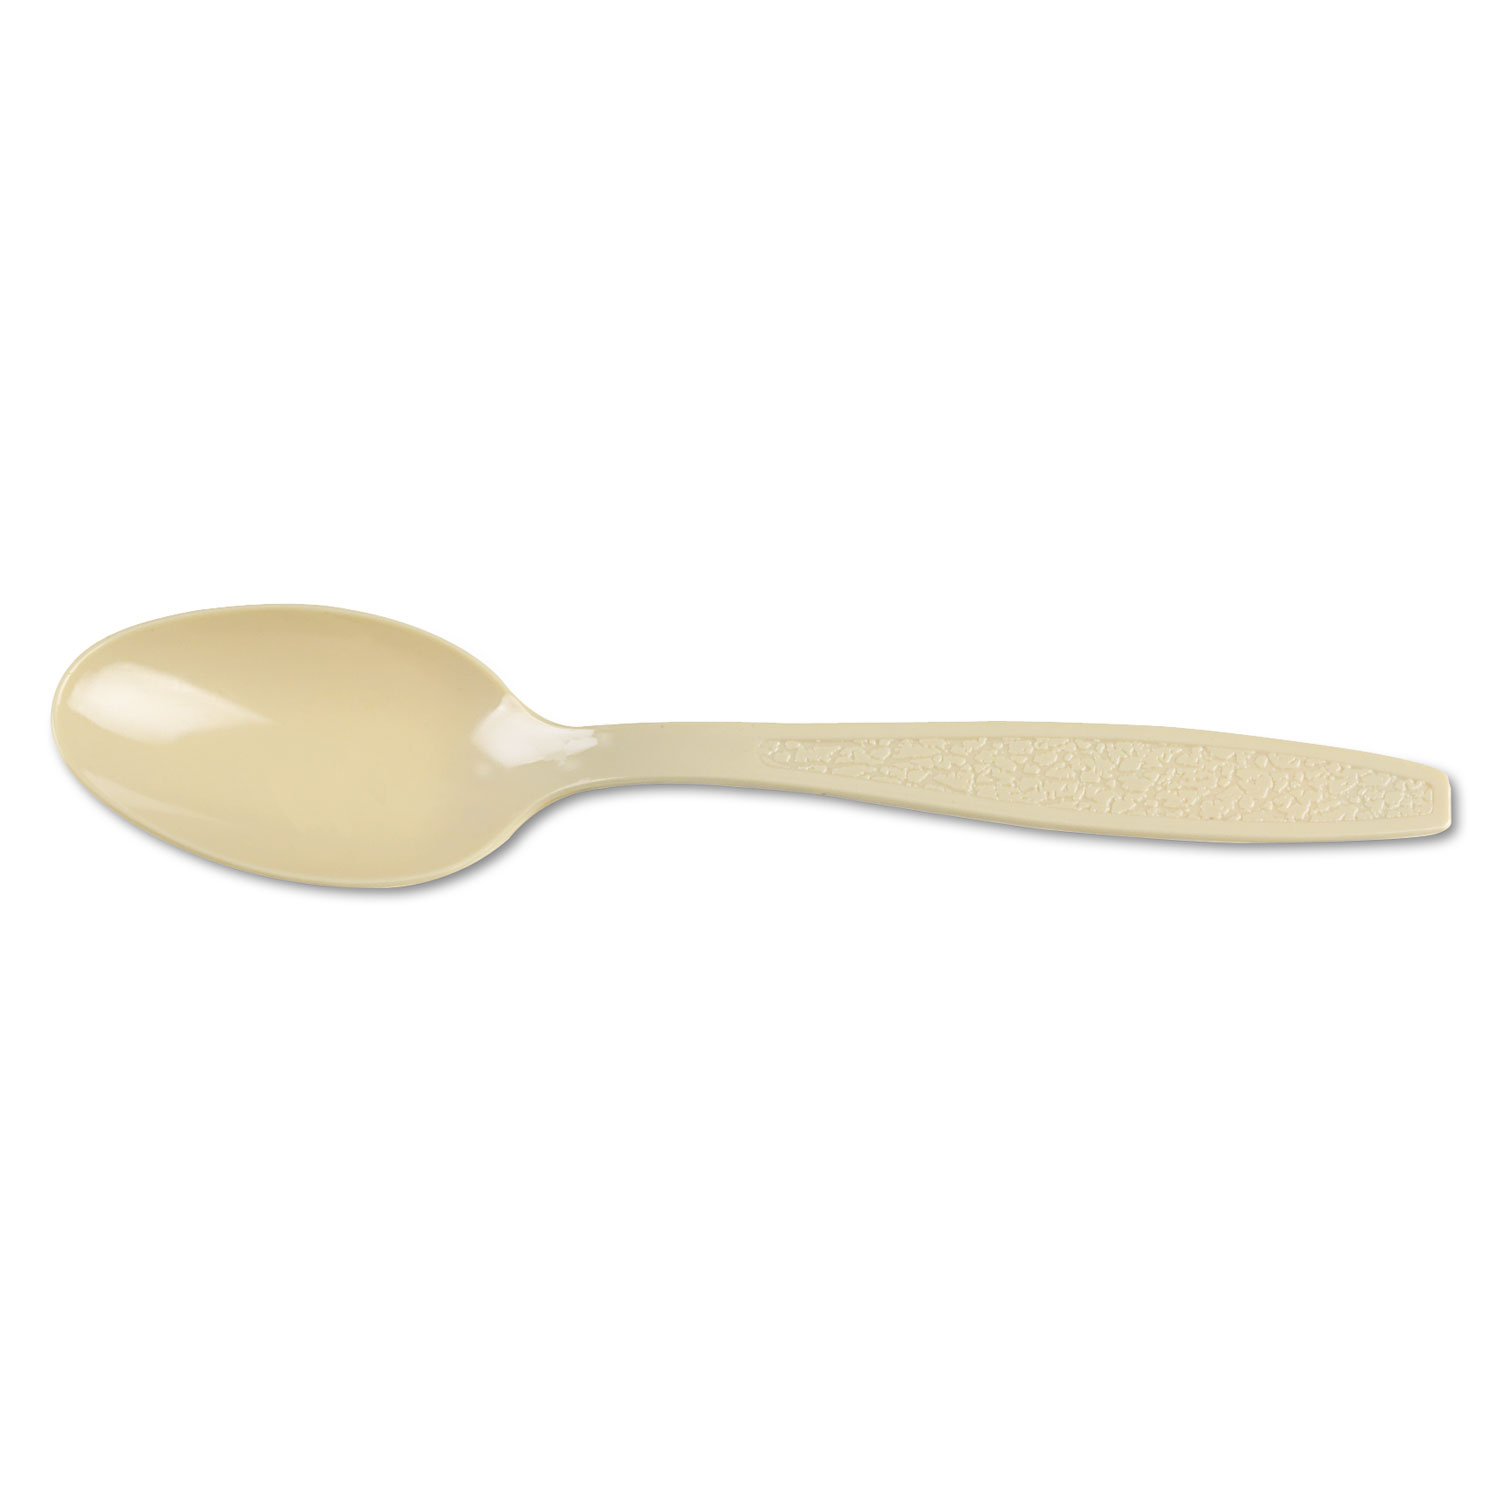  Dart GBX7TS-0019 Sweetheart Guildware Polystyrene Teaspoons, Champagne, 100/Box, 10 Boxes/Carton (SCCGBX7TS) 